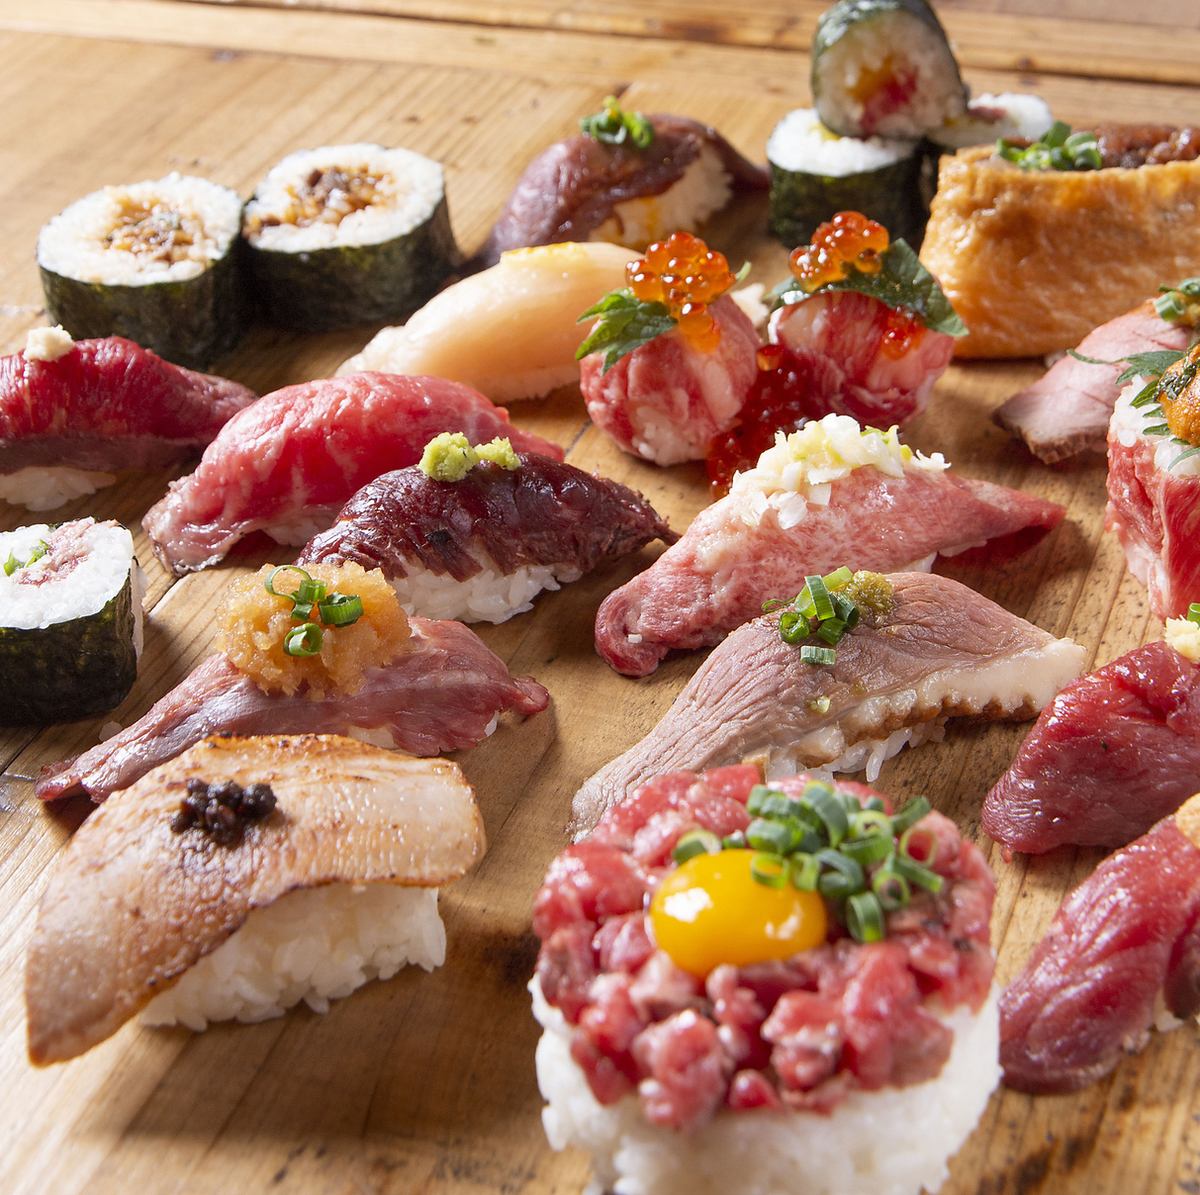 Meat sushi specialty store! Sapporo meat bar VOLTA! More than 40 types of sushi, including grilled sushi, meat sushi, and creative sushi!